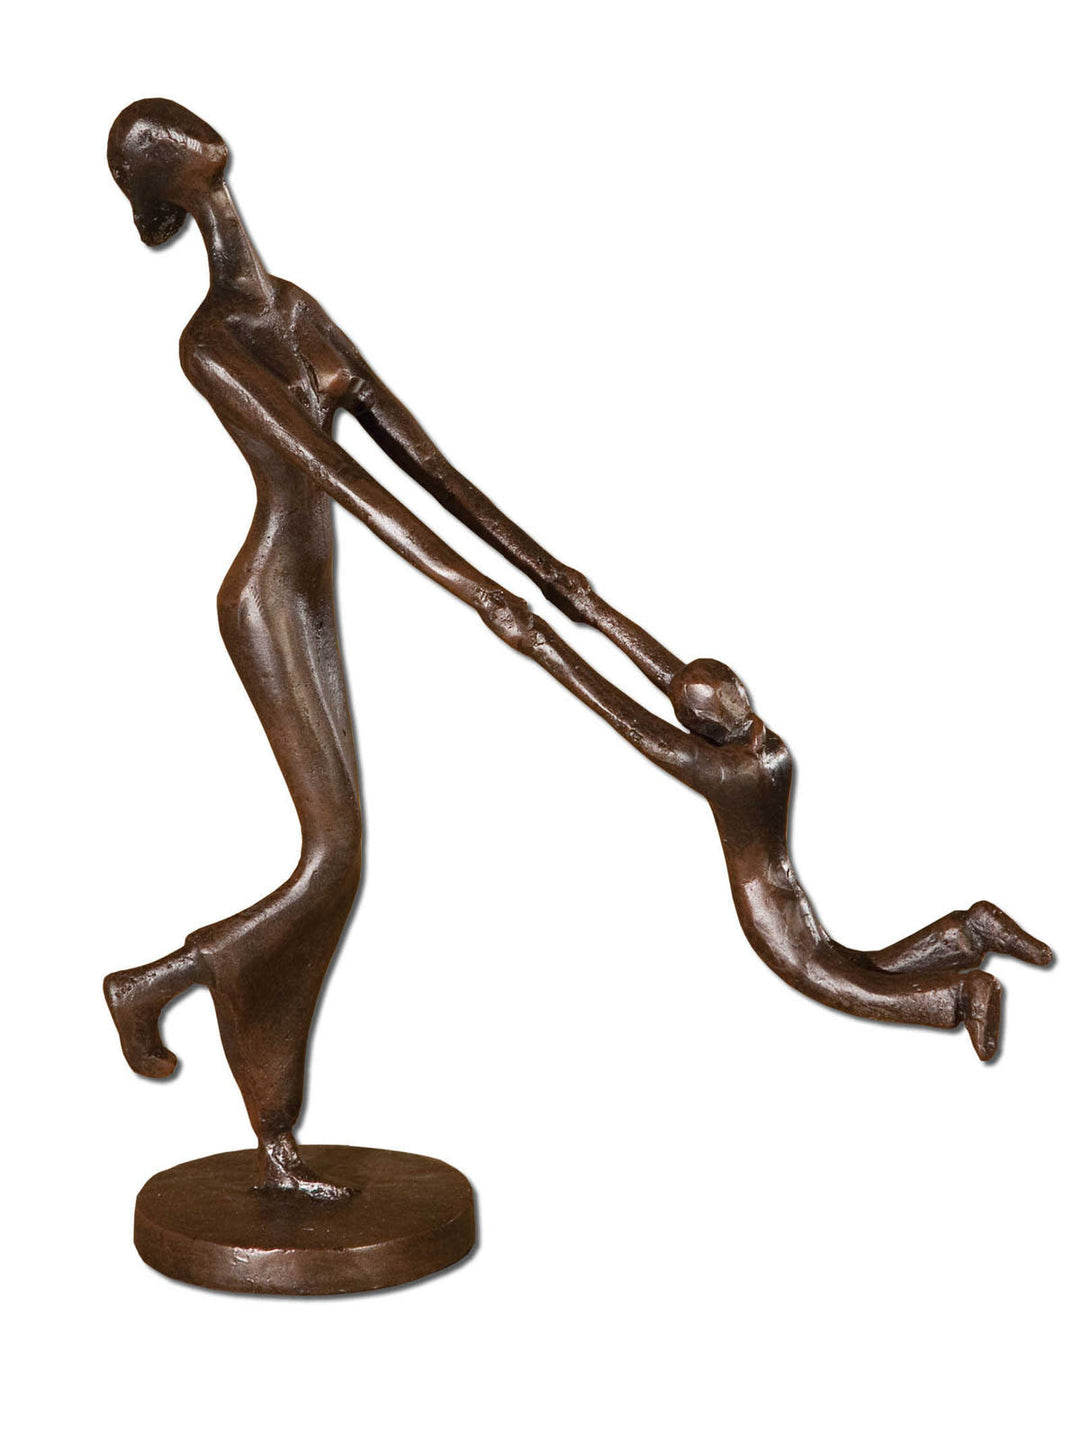 At Play Sculpture by Uttermost